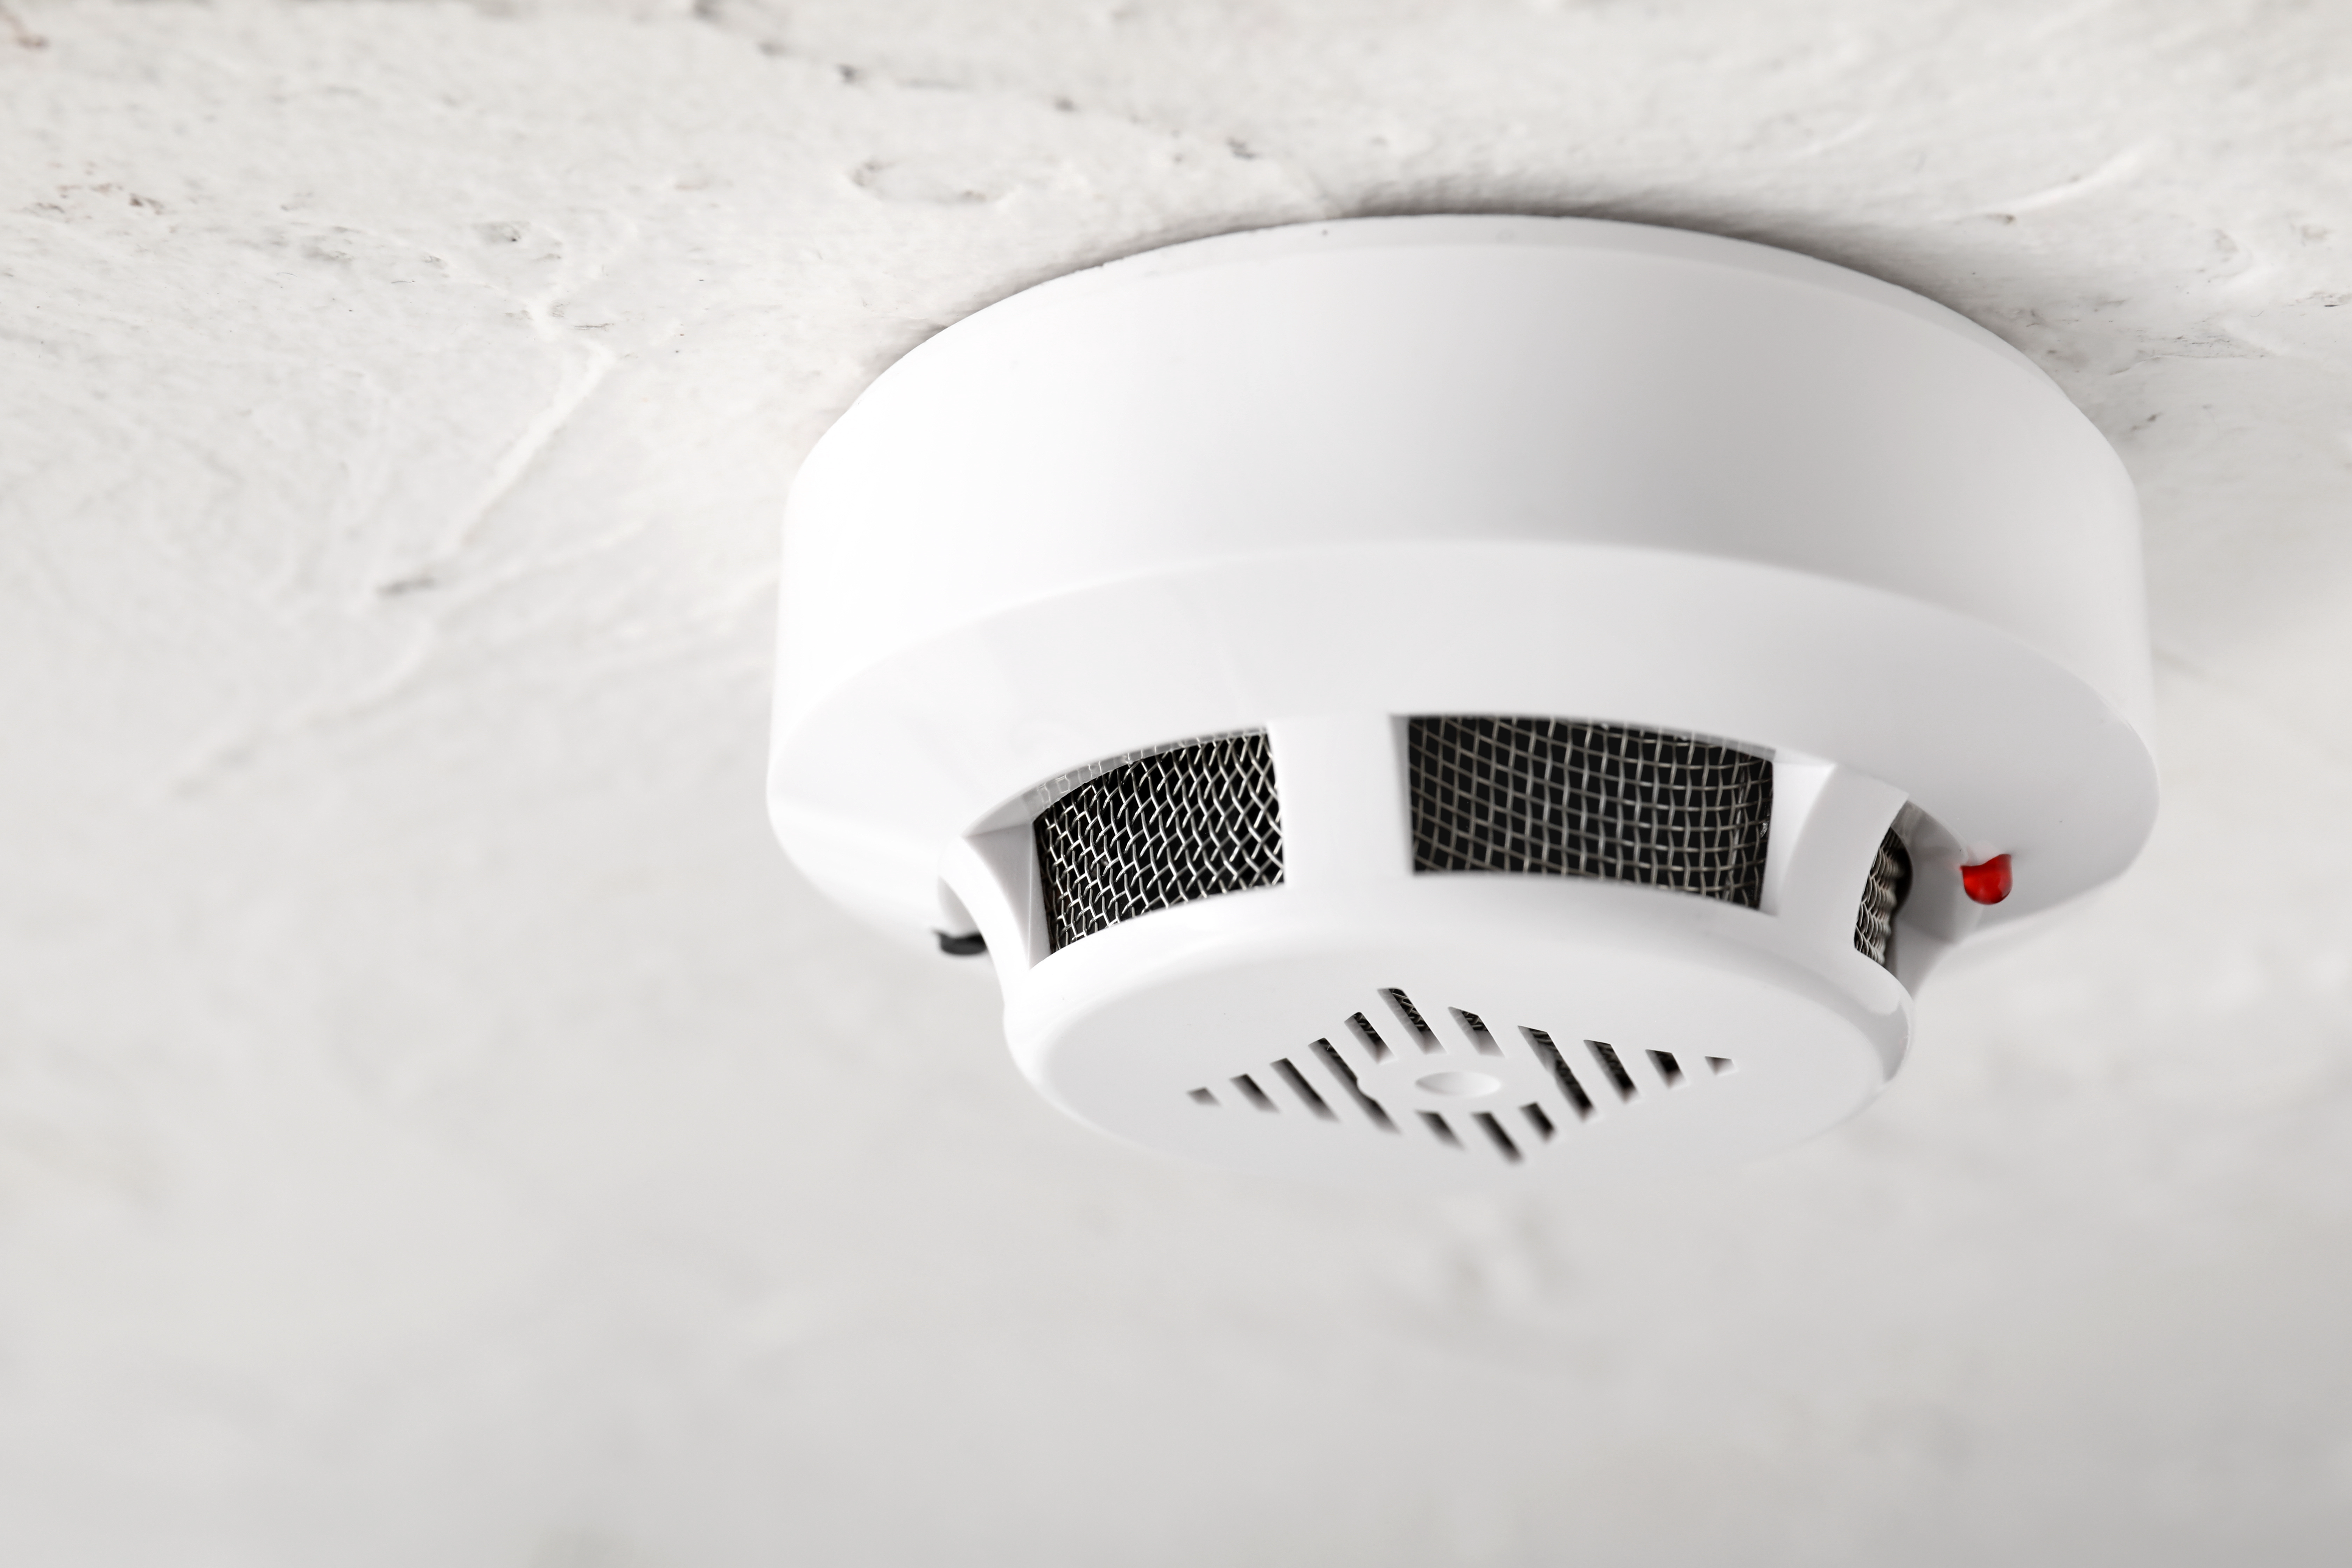 Smoke alarms save lives. Make sure yours work. Test them now